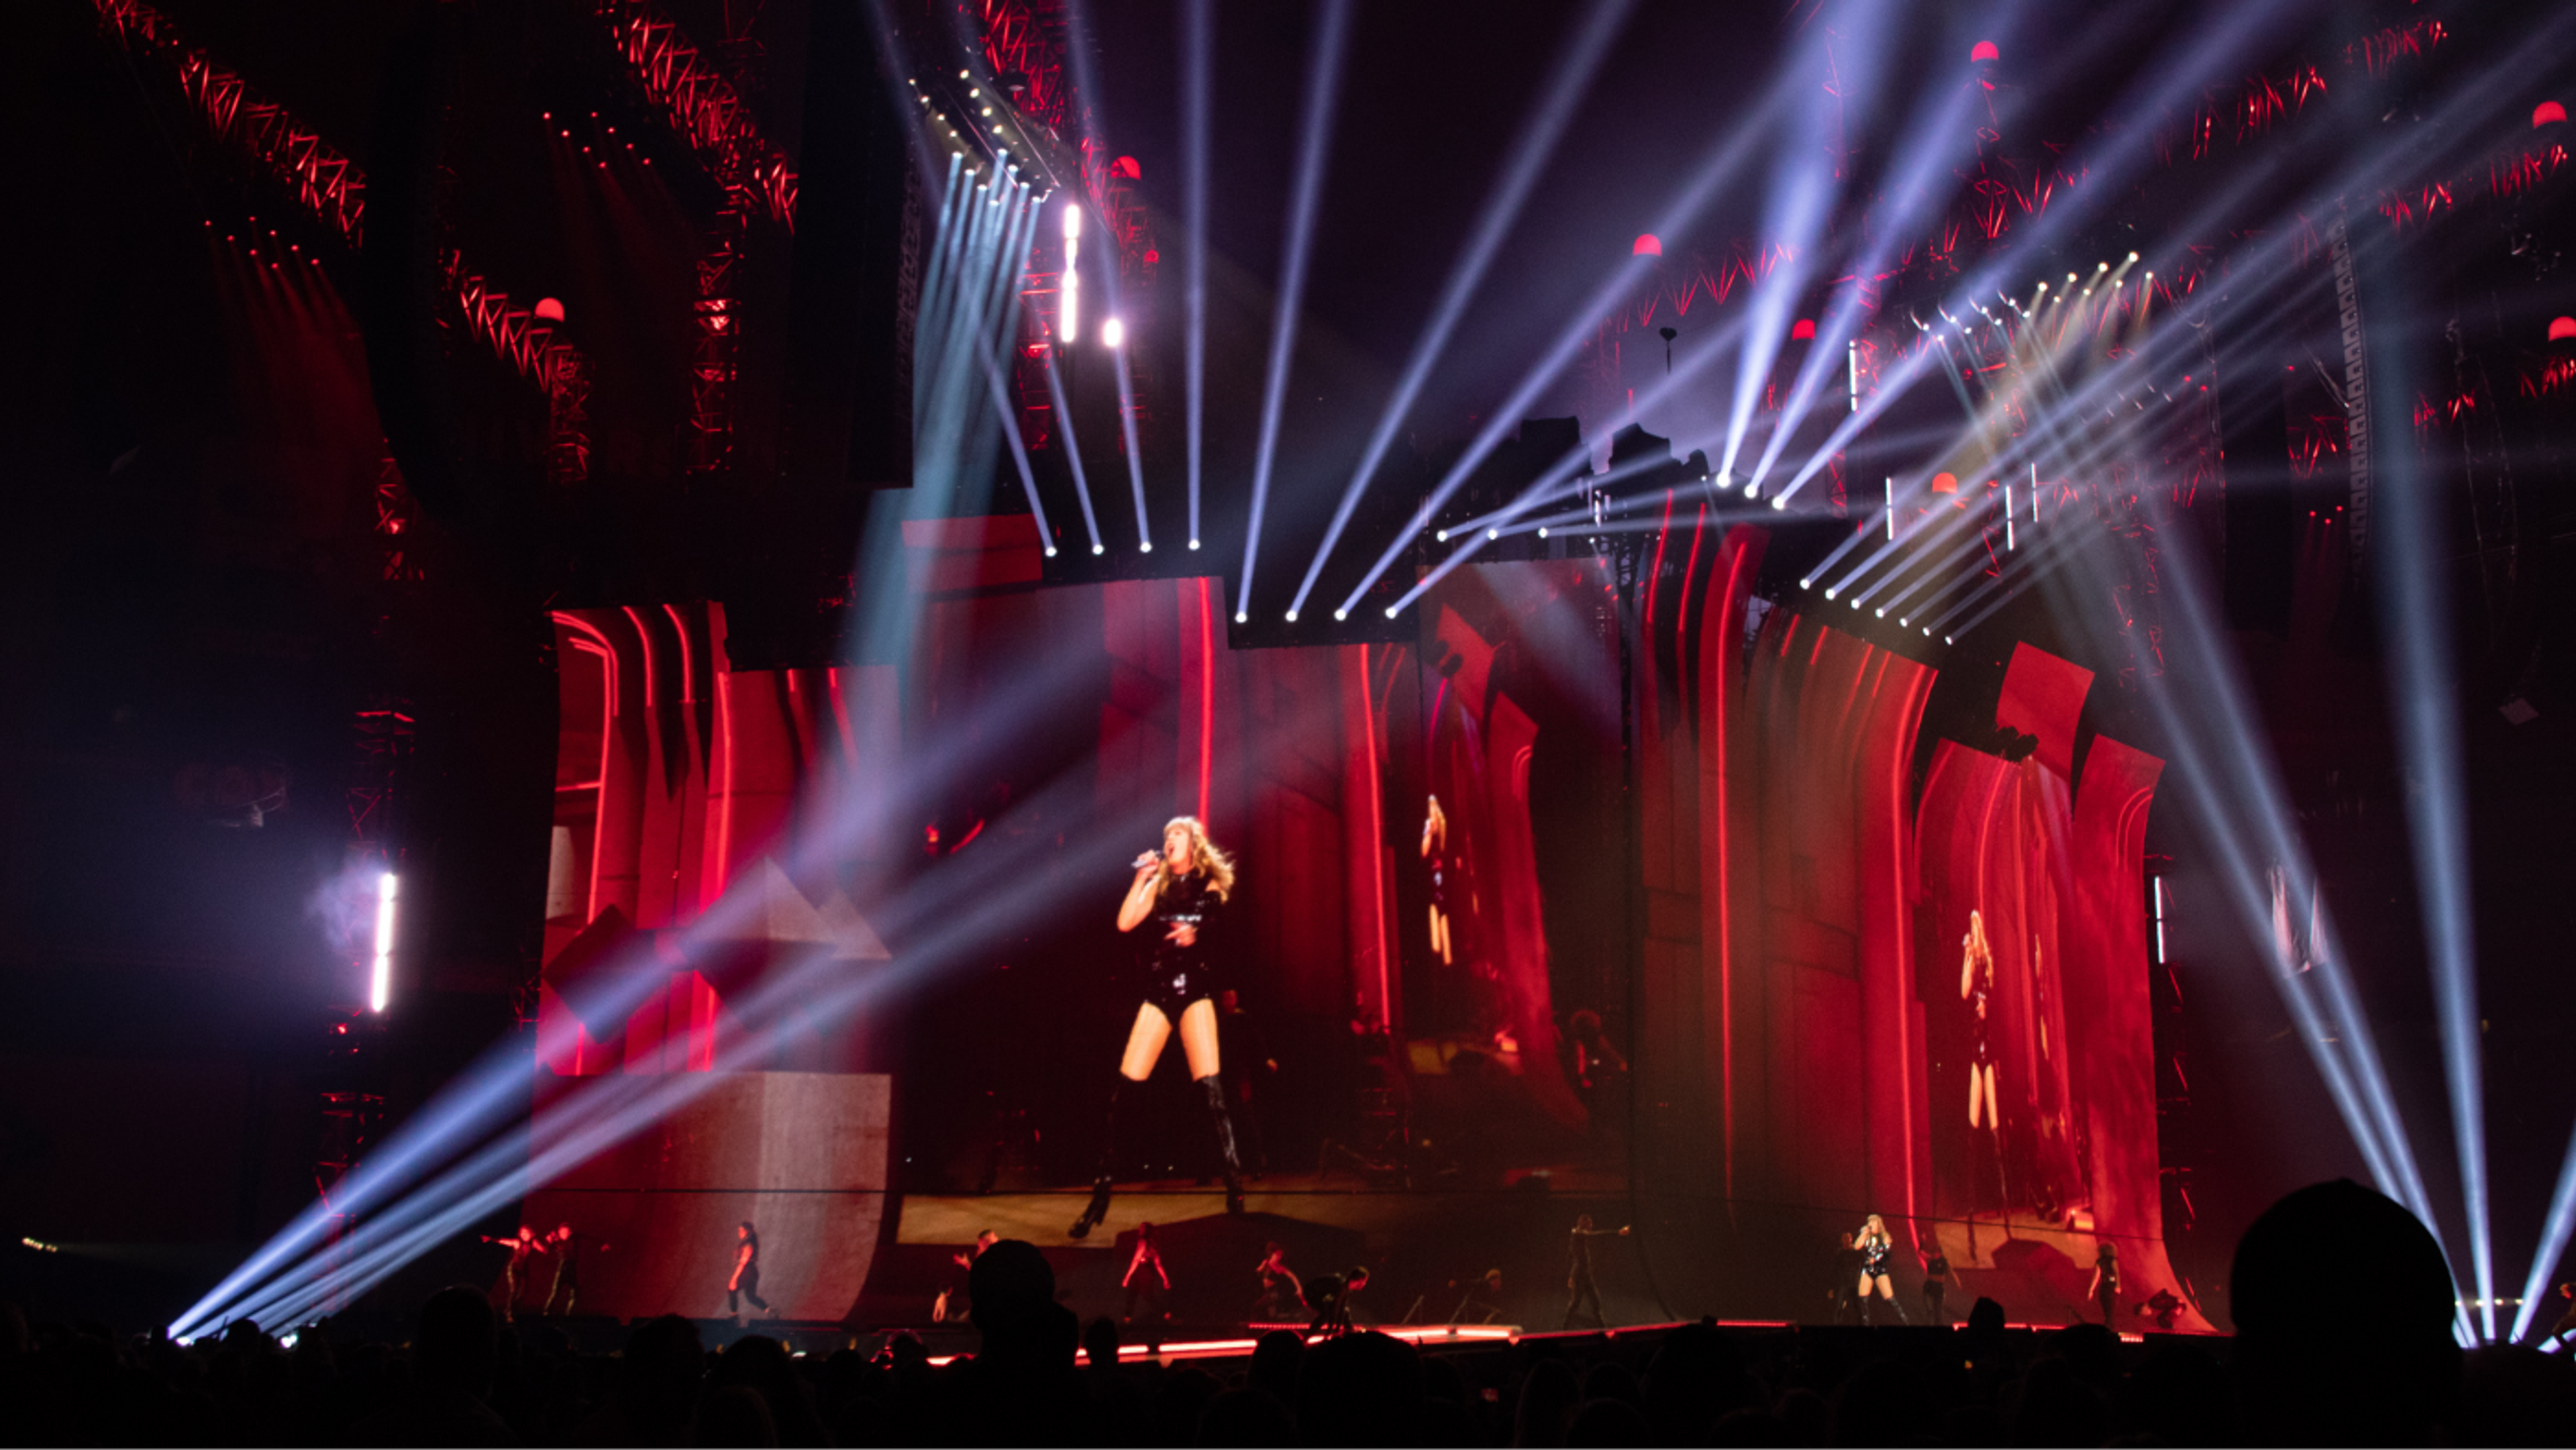 taylor swift performing, projected on stage screens